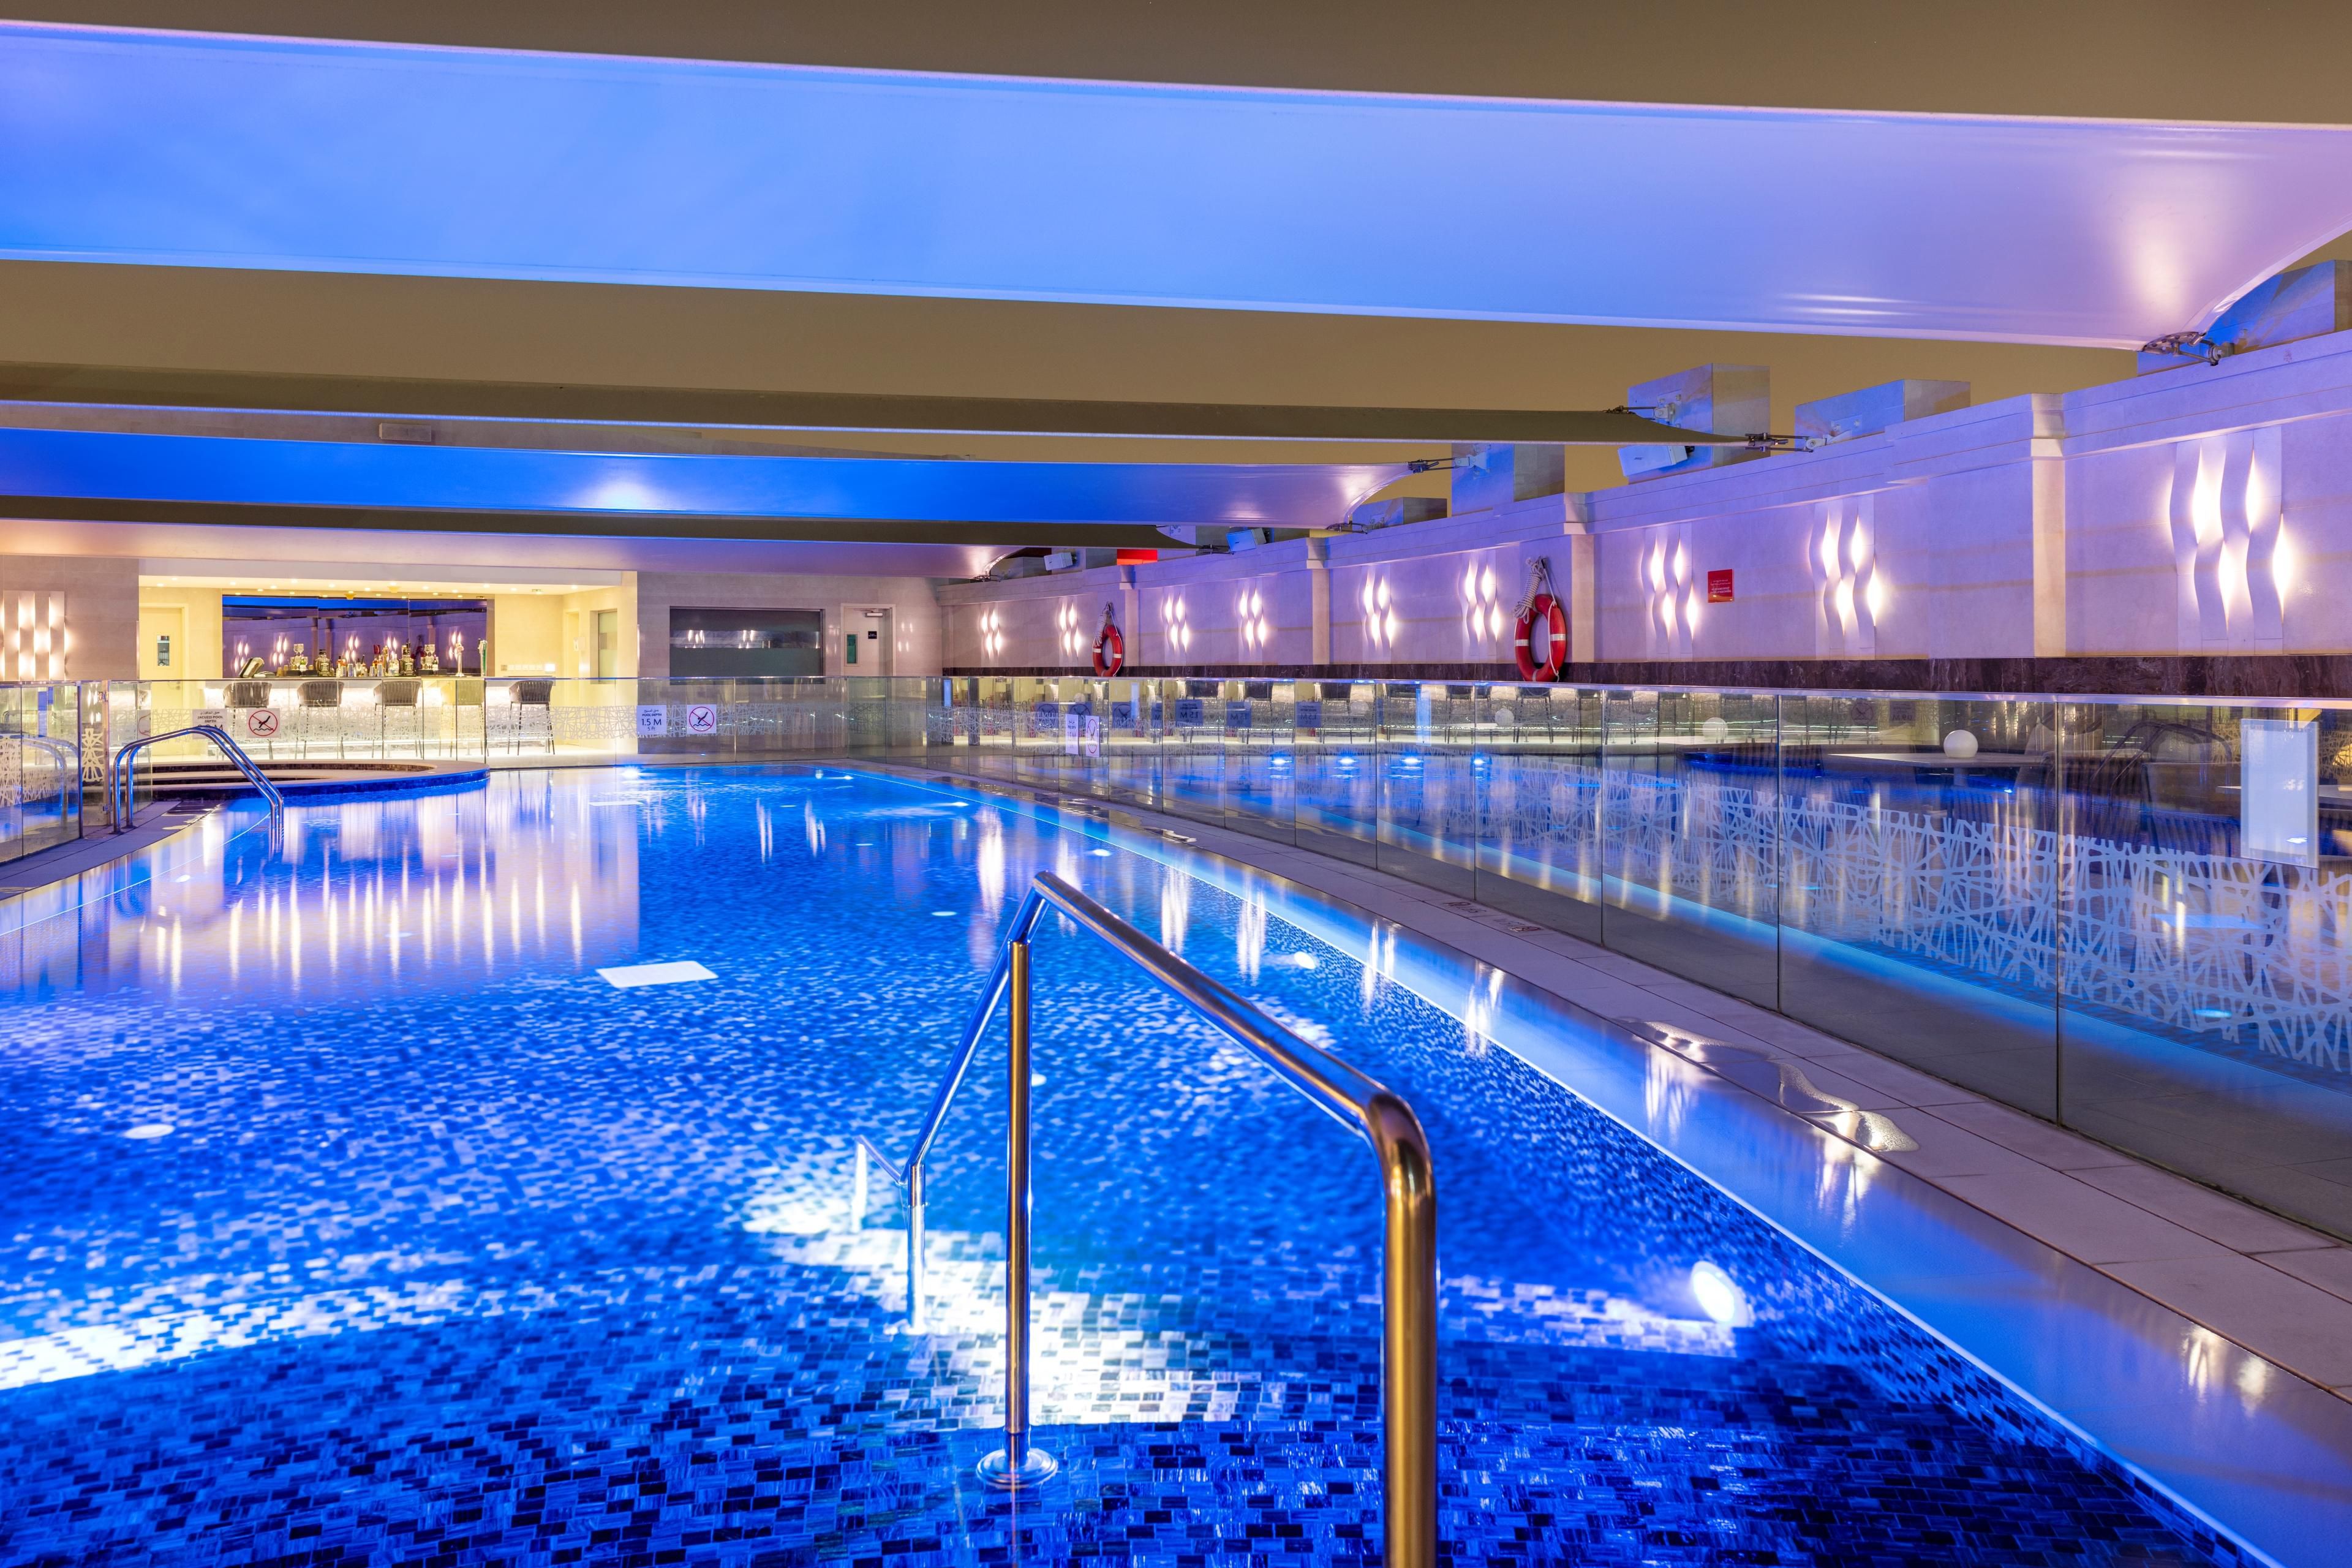 Our outdoor swimming pool is the perfect place for a night swim.